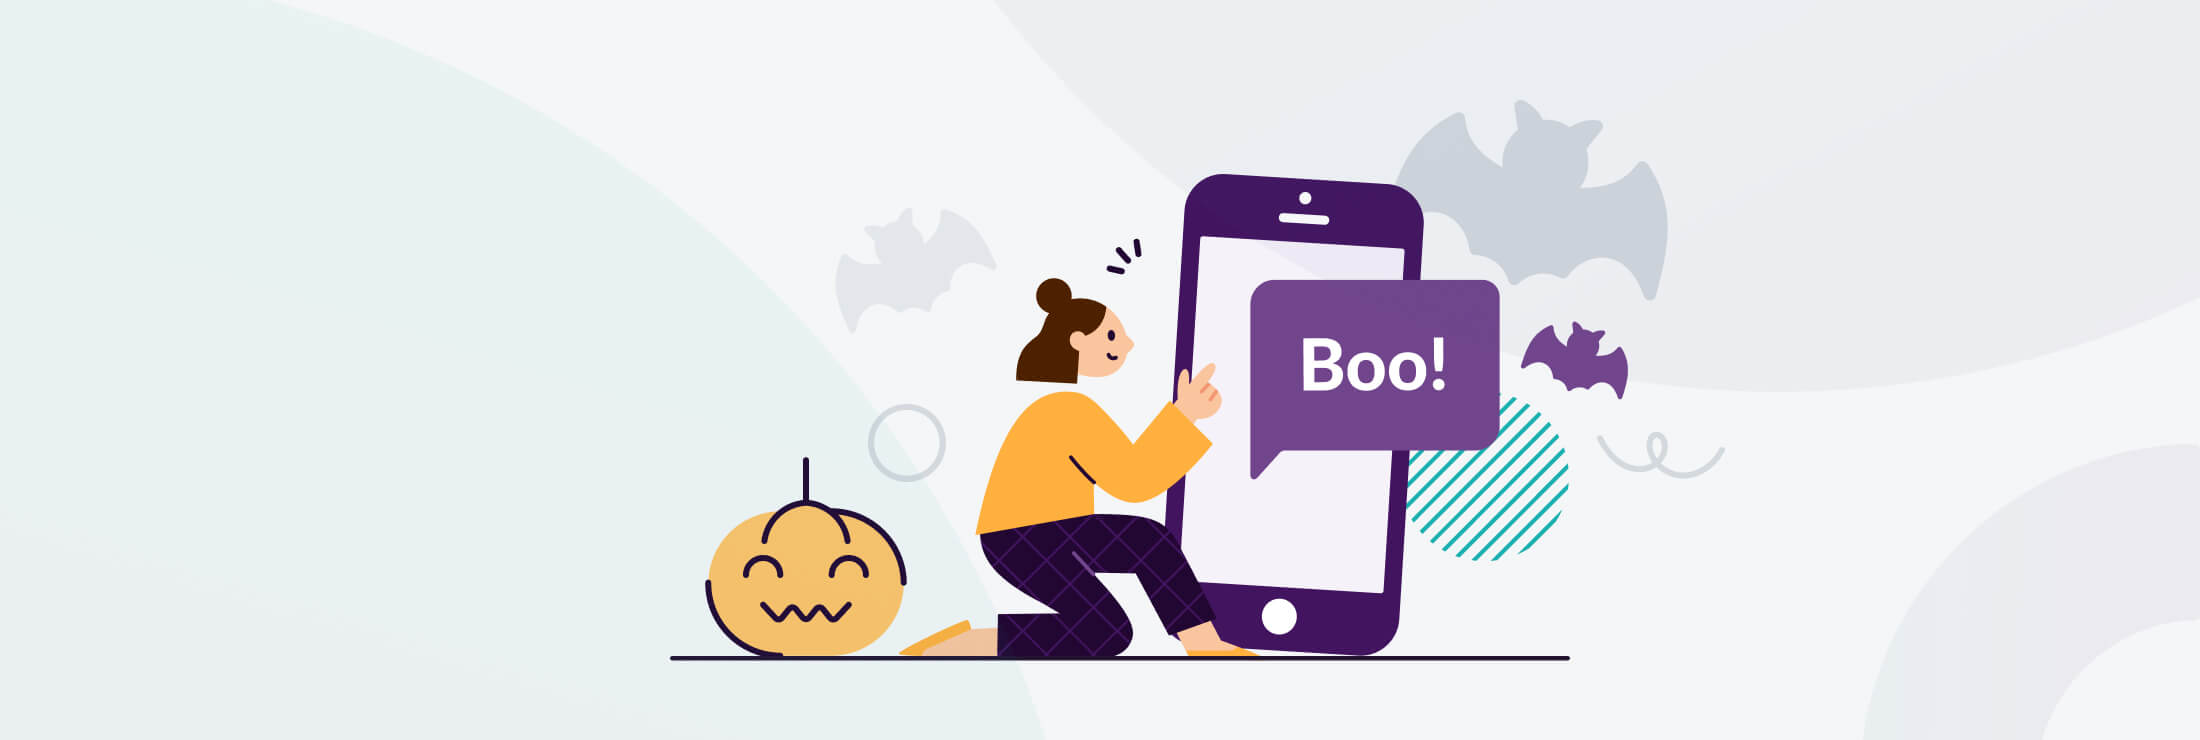 Haloween SMS messaging